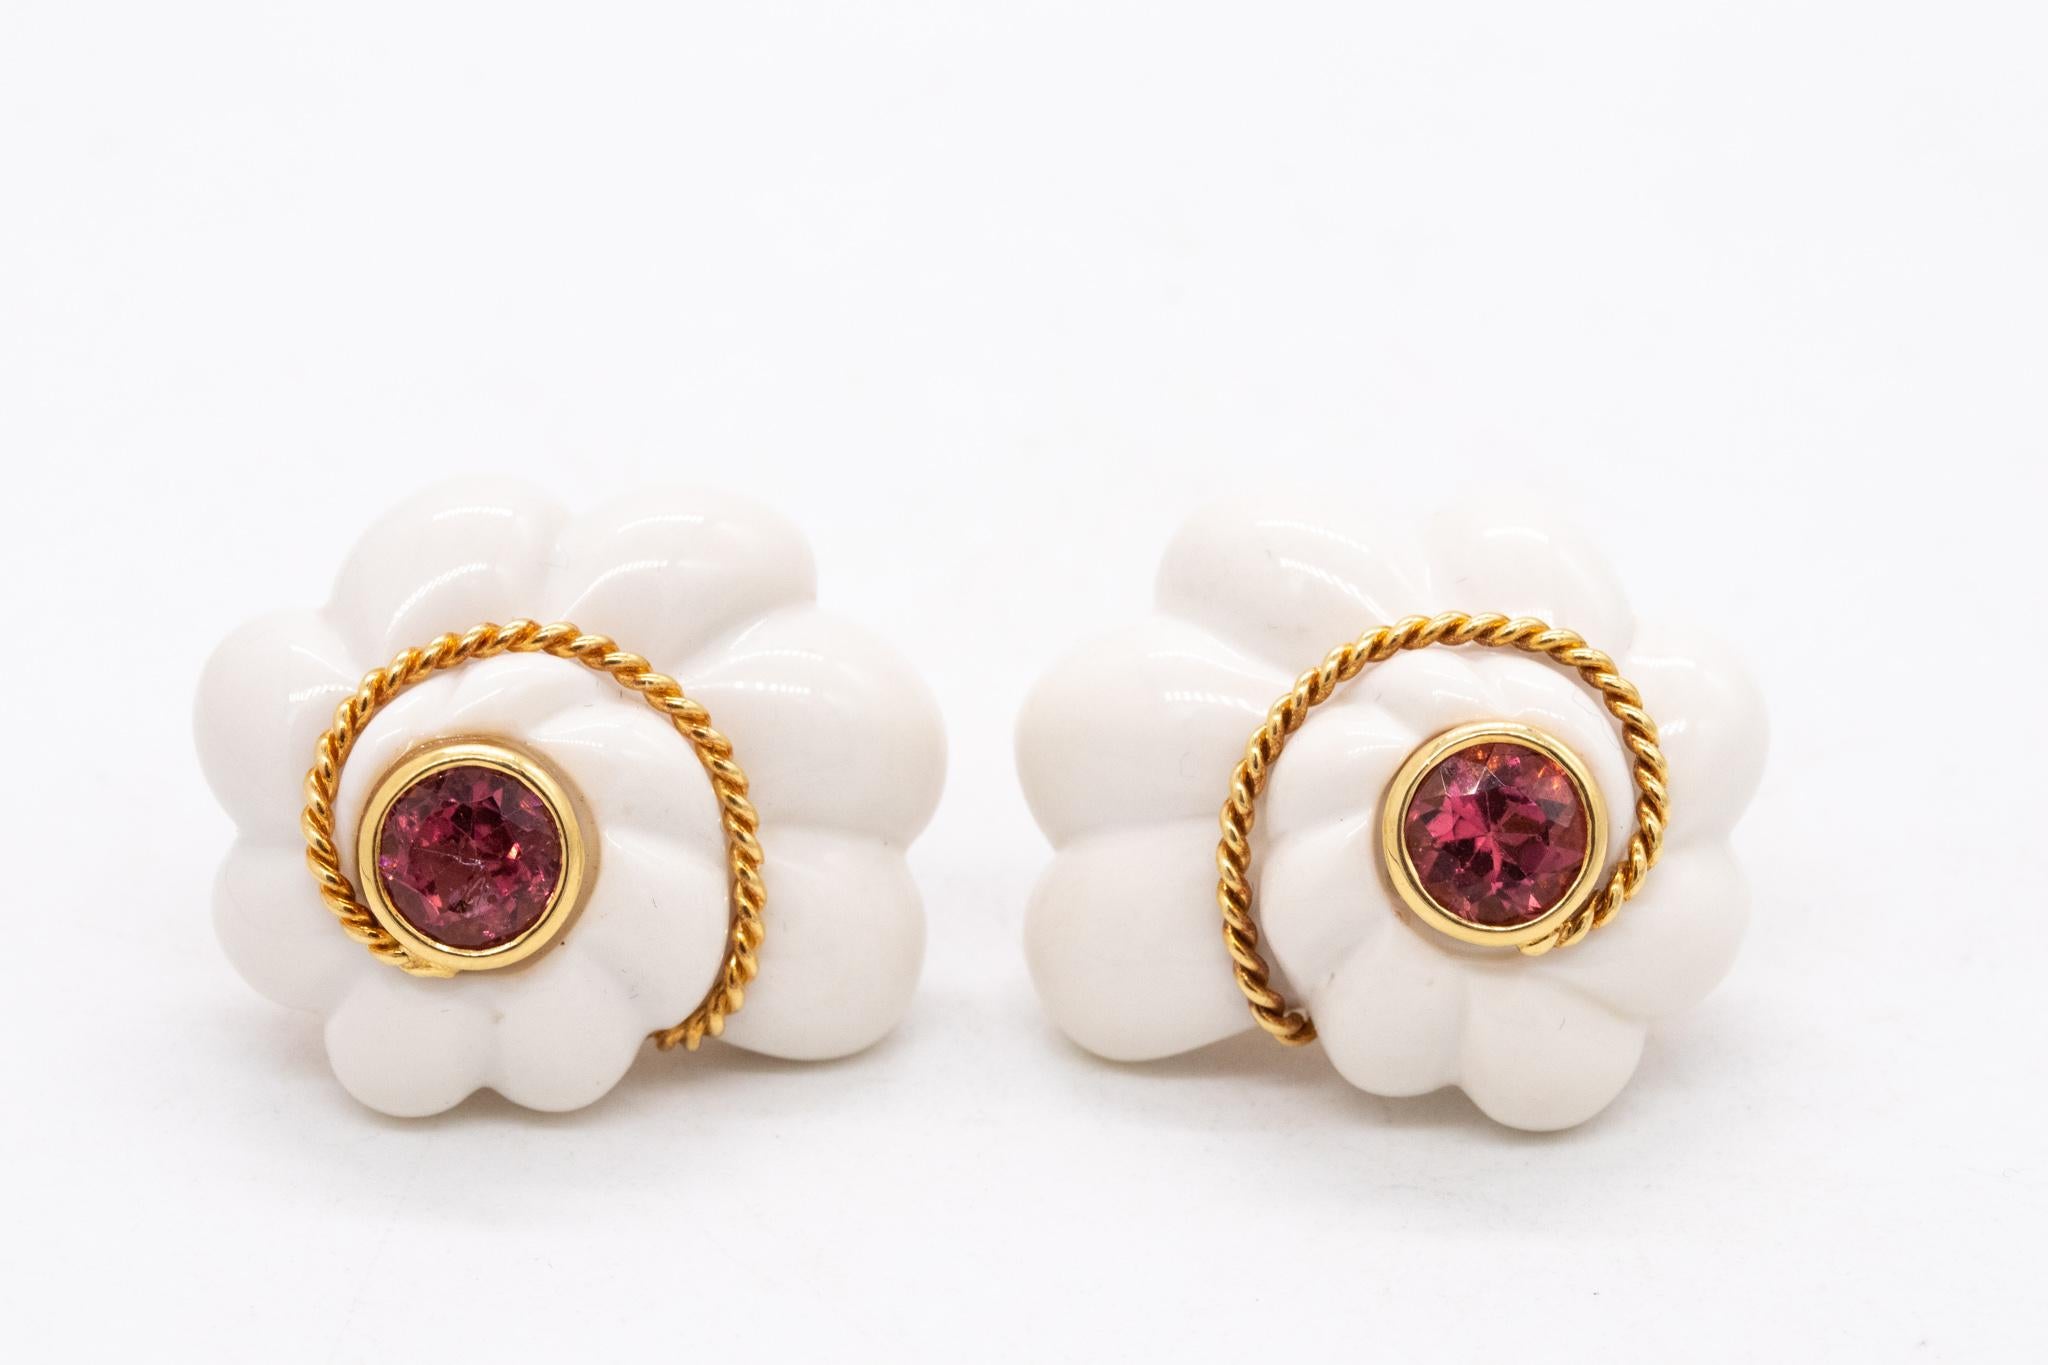 Women's Valentin Magro 18Kt Gold Earrings 74.6 Cts In Rubellite And Cacholong White Opal For Sale